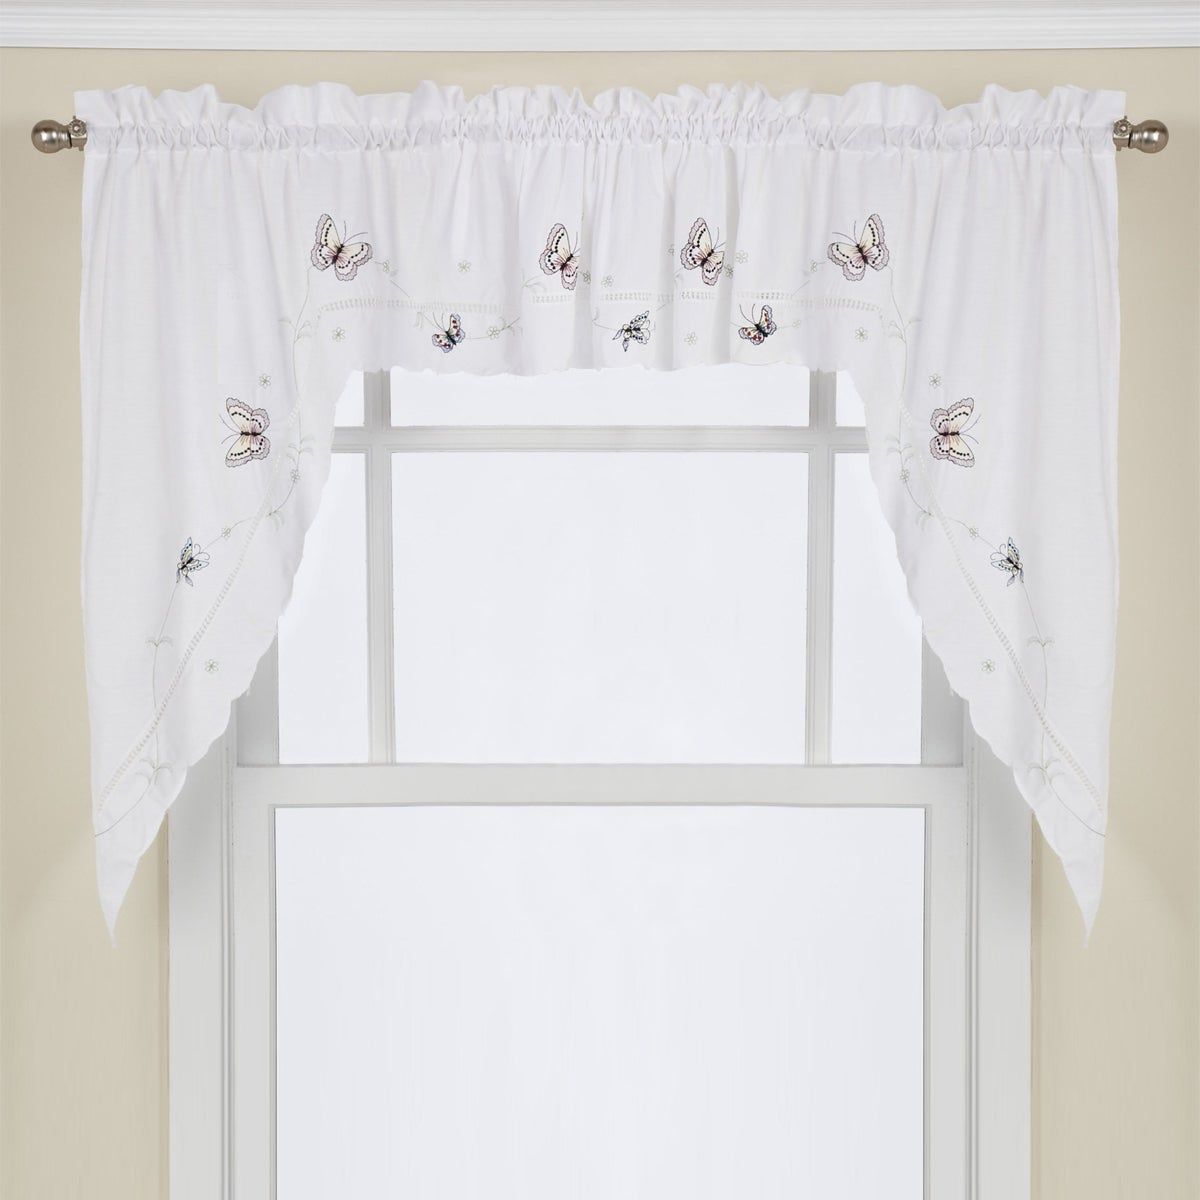 Fluttering Butterfly White Embroidered Tier, Swag, Or Valance Kitchen  Curtains Regarding Floral Embroidered Sheer Kitchen Curtain Tiers, Swags And Valances (View 13 of 20)